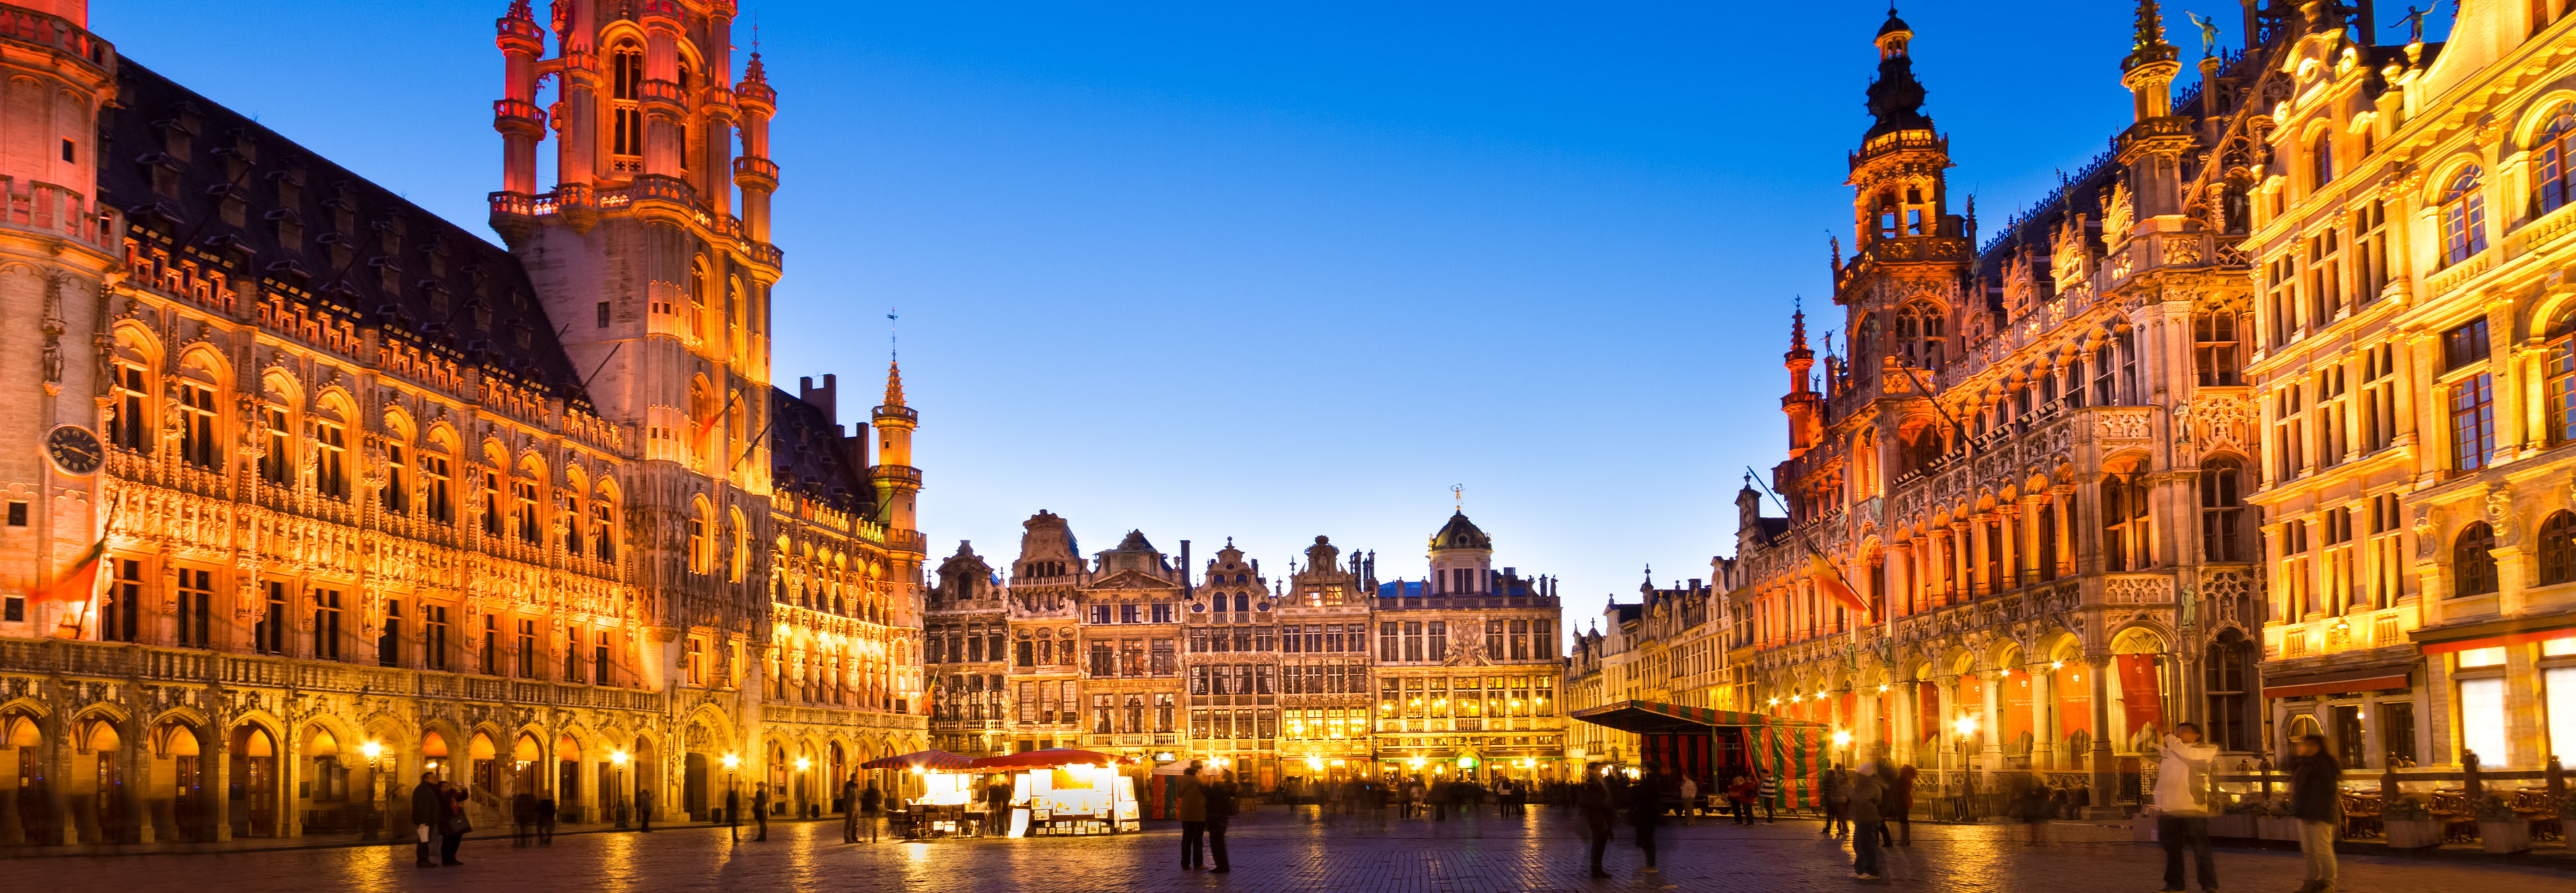 Cross the border and visit Brussels:
Brussels is the capital of Belgium and is referred to as the "capital” of the European Union being the headquarters of two European Union institutions